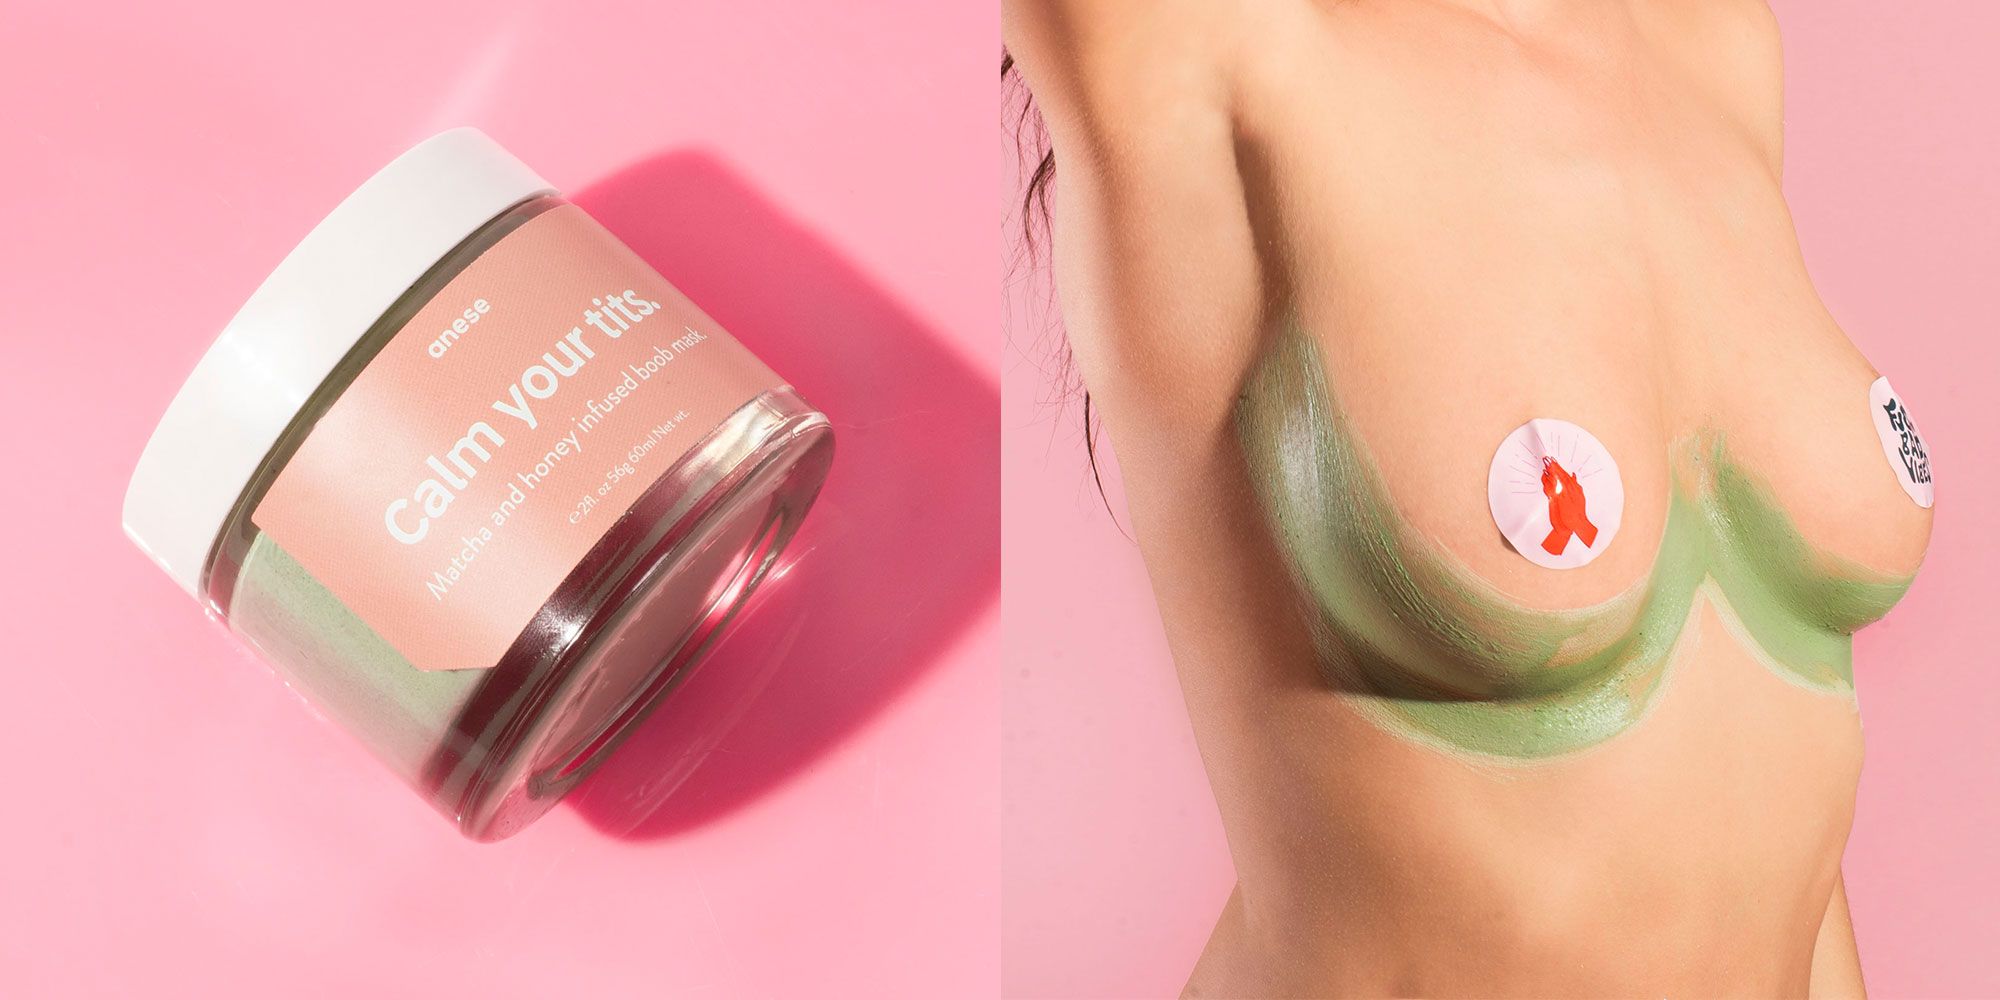 I Tried the Anese Calm Your Tits Boob Mask from Instagram - How to Get  Firmer Breasts With Masks